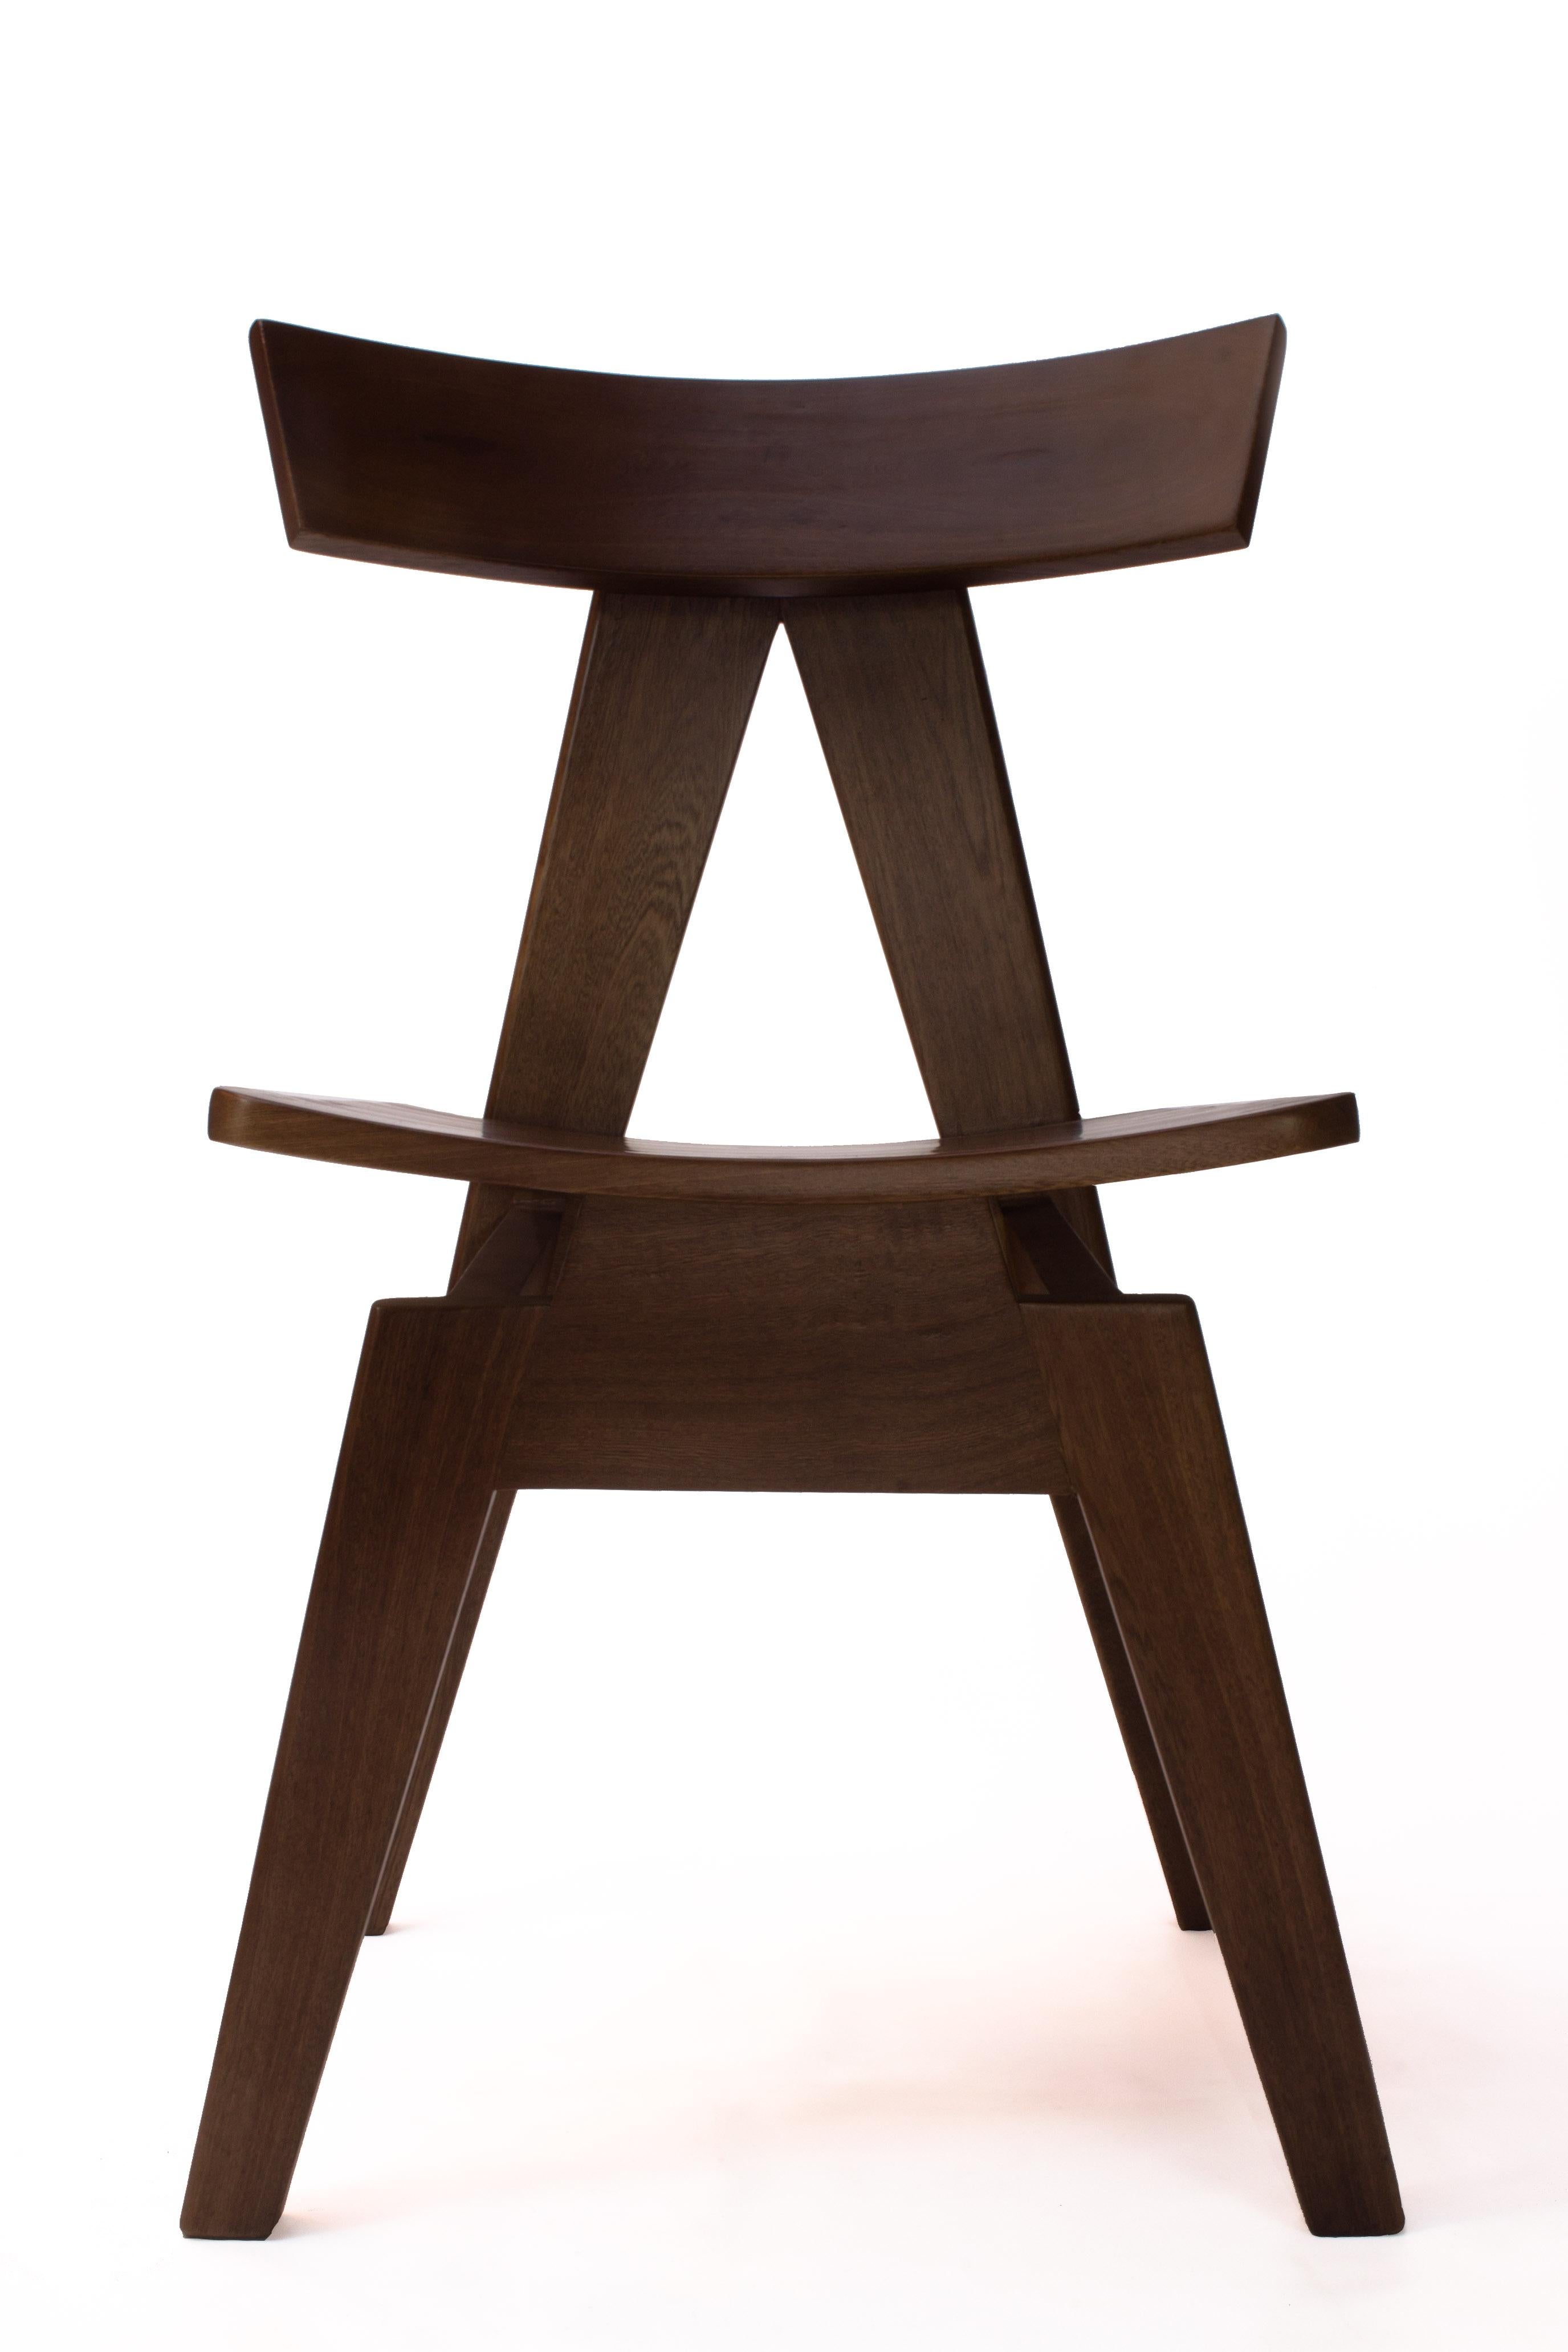 Dining chair Marques by Camilo Andres Rodriguez Marquez (aka CarmWorks)

Solid oak or cedar / Burnt wood or natural

Each piece is made to order and hand crafted by the artist.

--
Camilo Andres Rodriguez Marquez is a Colombian born designer